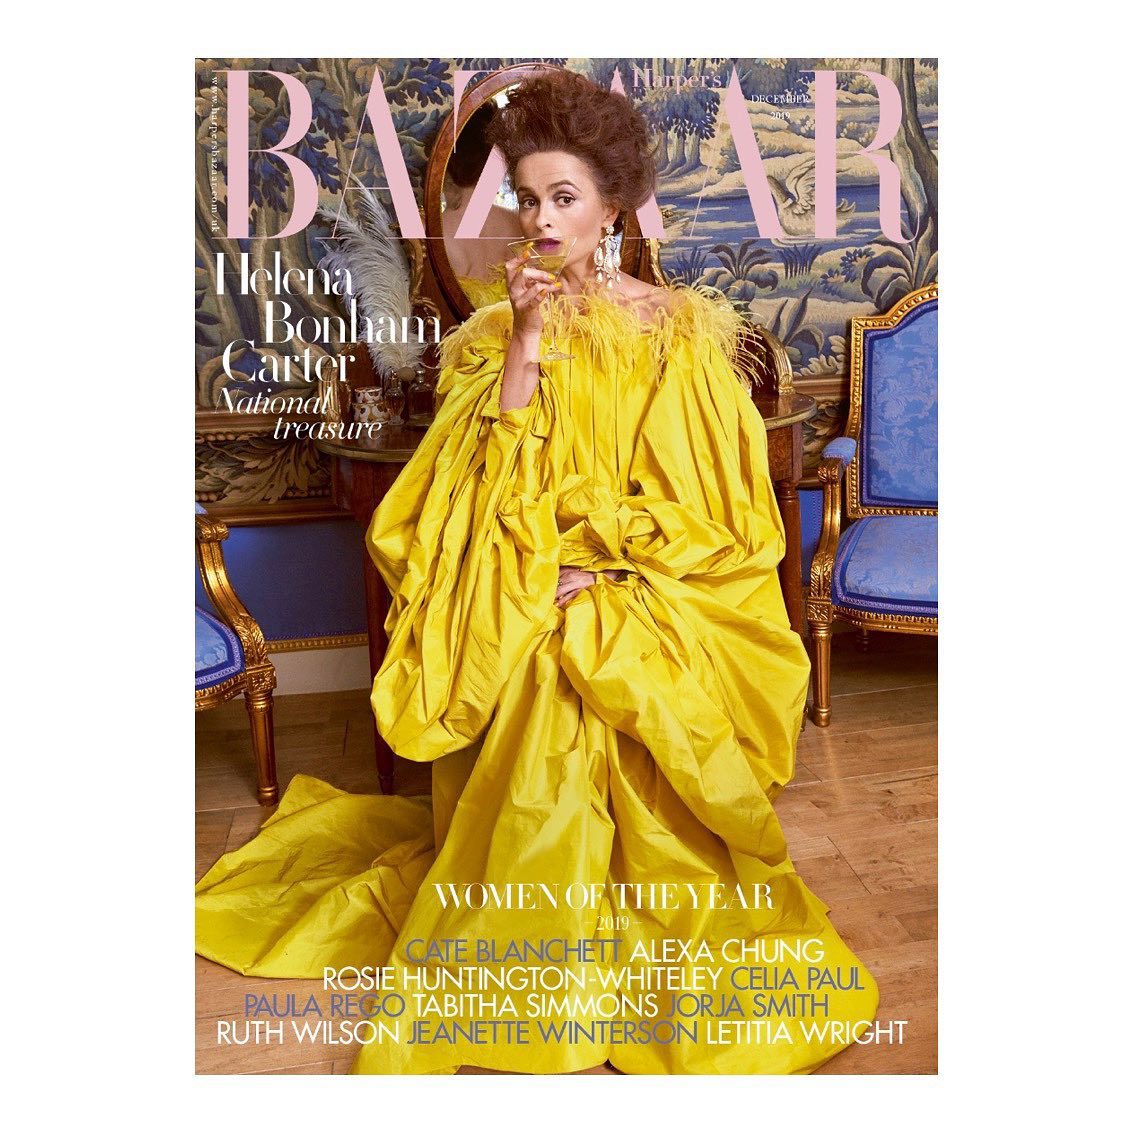 Congratulations to Helena Bonham Carter who was crowned Harper’s Bazaar British Icon of the Year last night. Helena graces the cover of this month’s @bazaaruk, talking about her role as Princess Margaret in @thecrownnetflix 
.
.
.
.